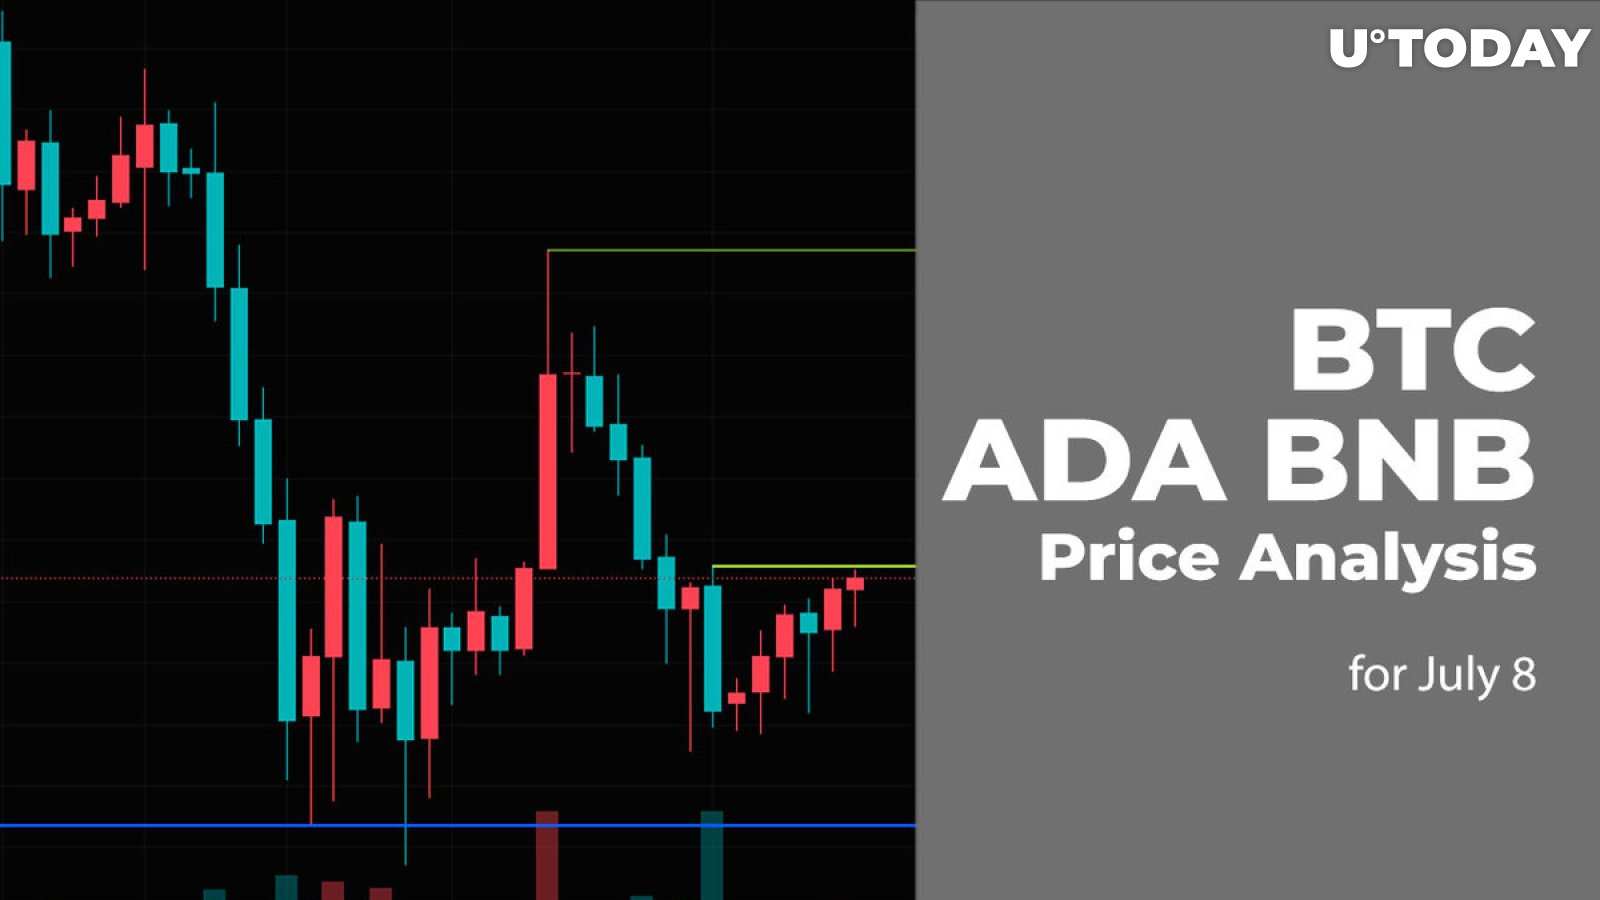 BTC, ADA and BNB Price Analysis for July 8